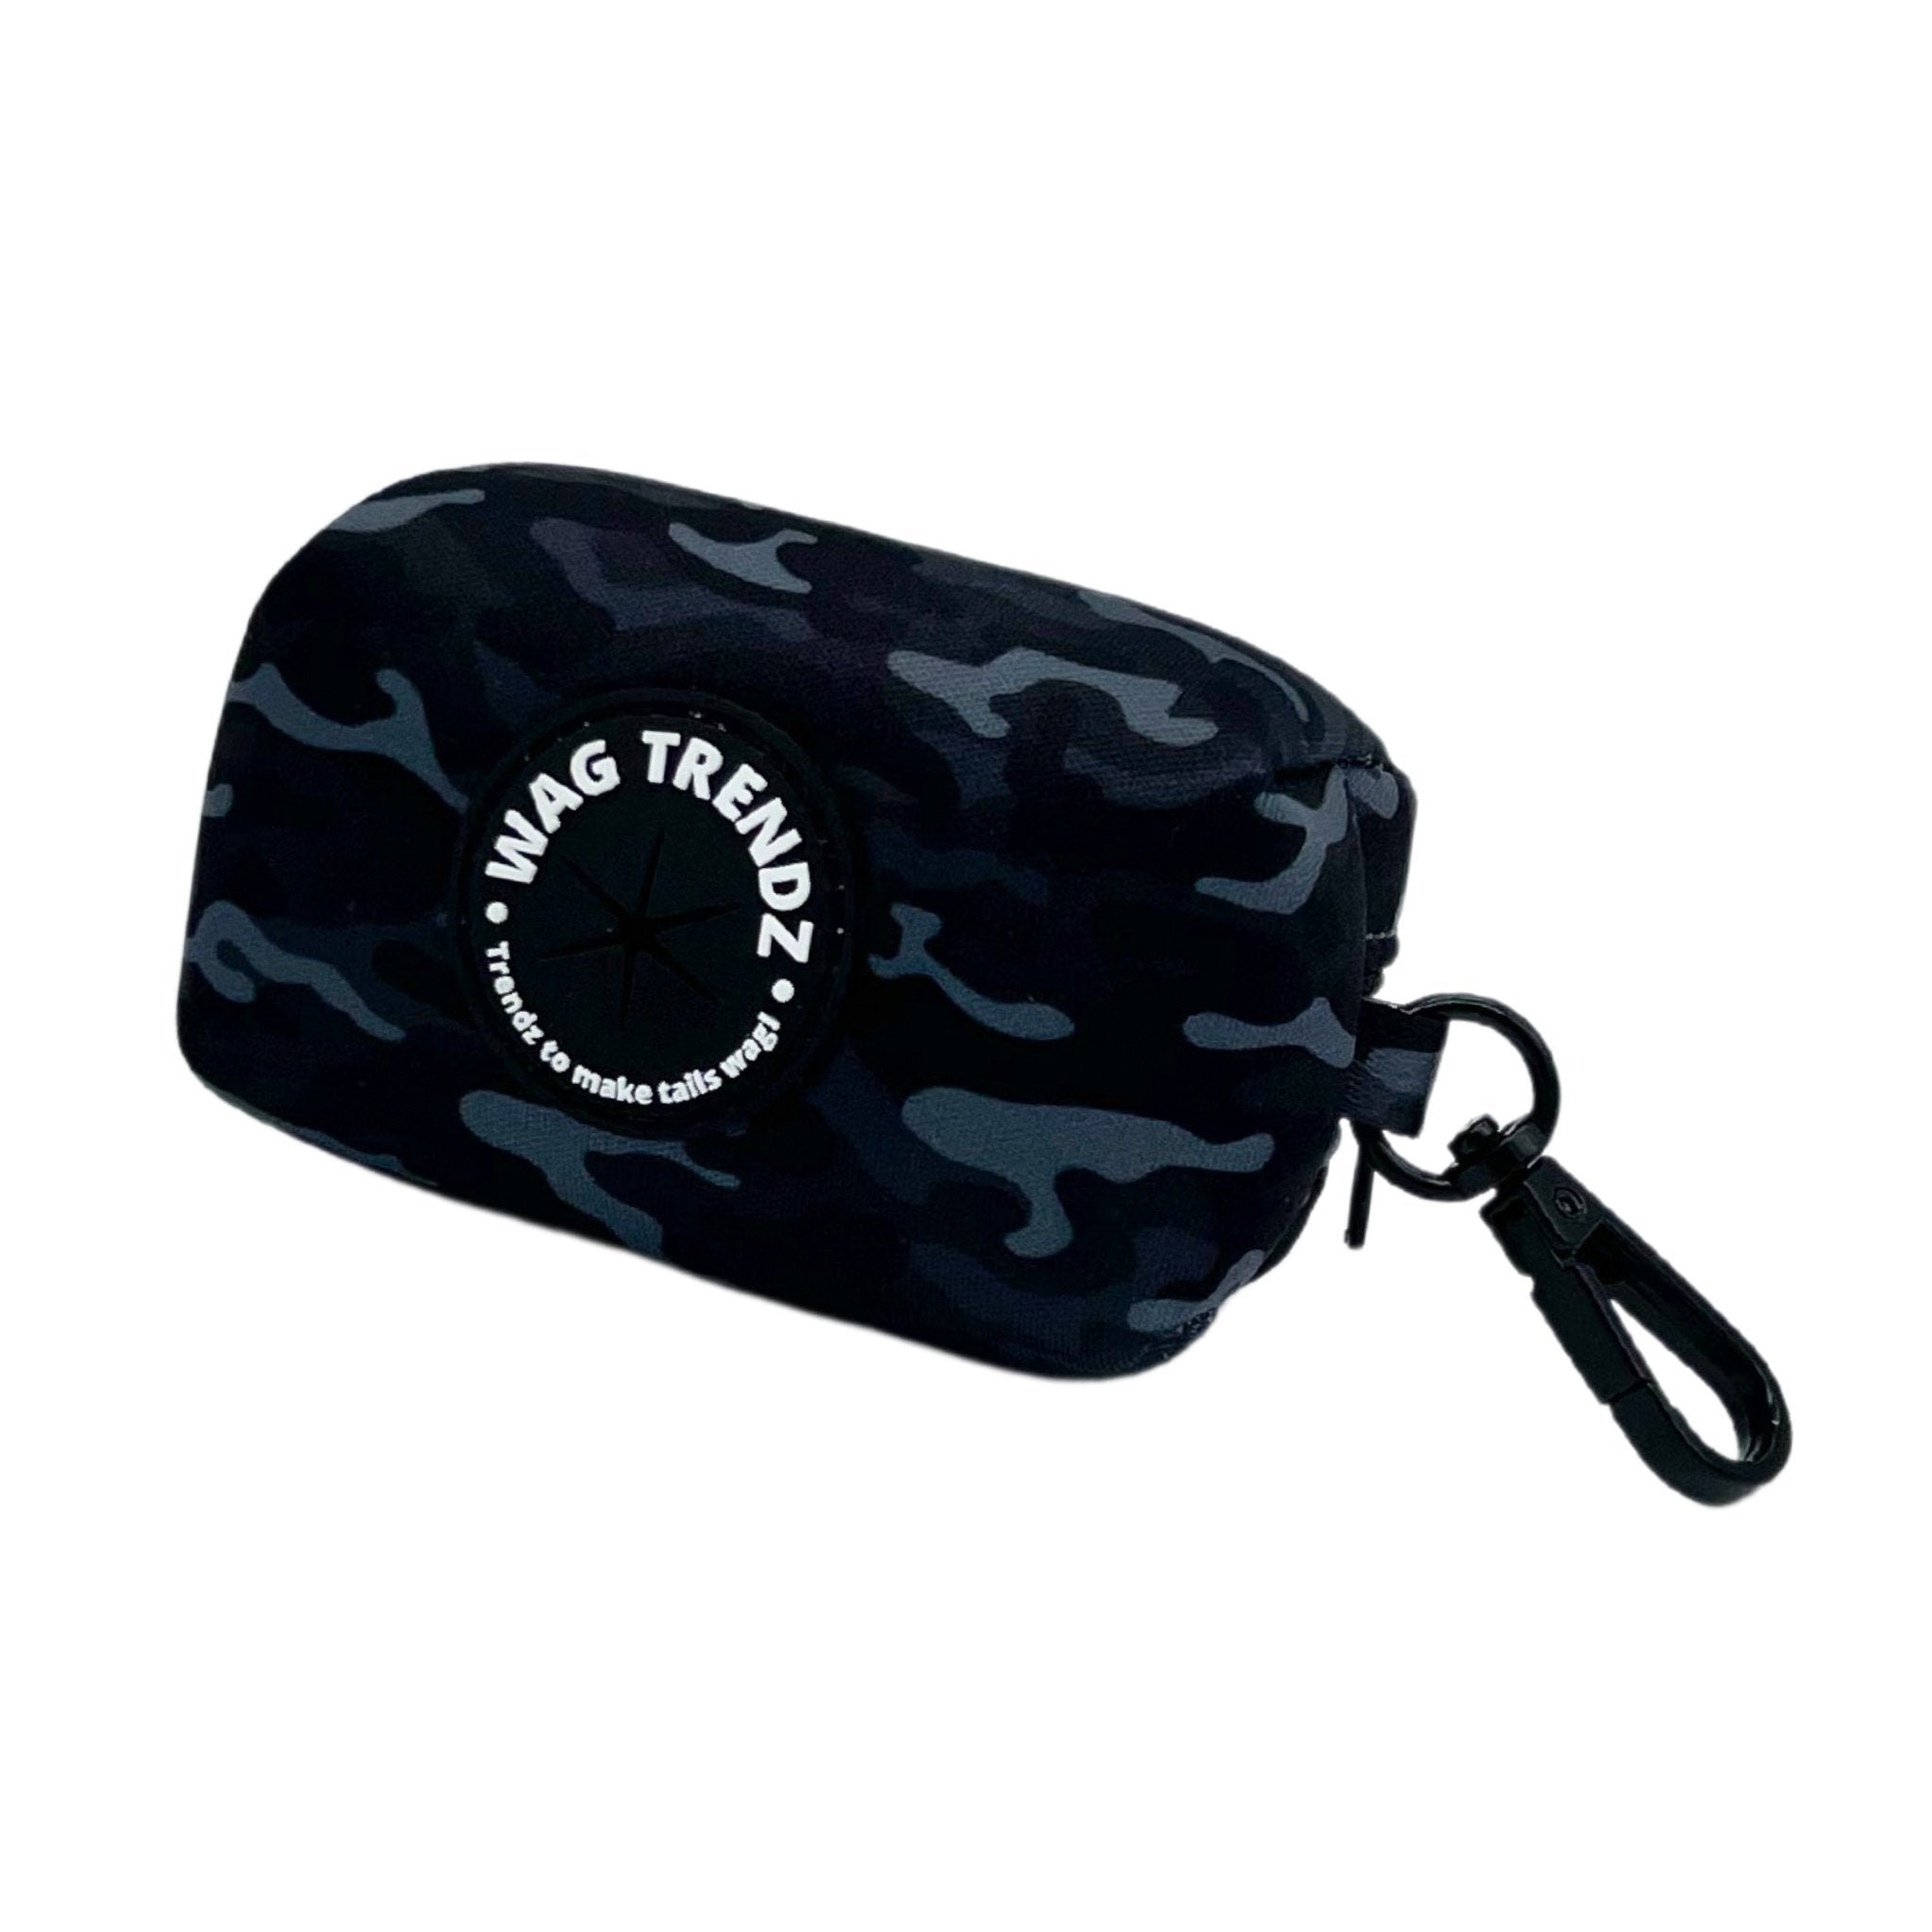 By Scout - Premium vegan Pooch Pouches aka Poo Bag holders